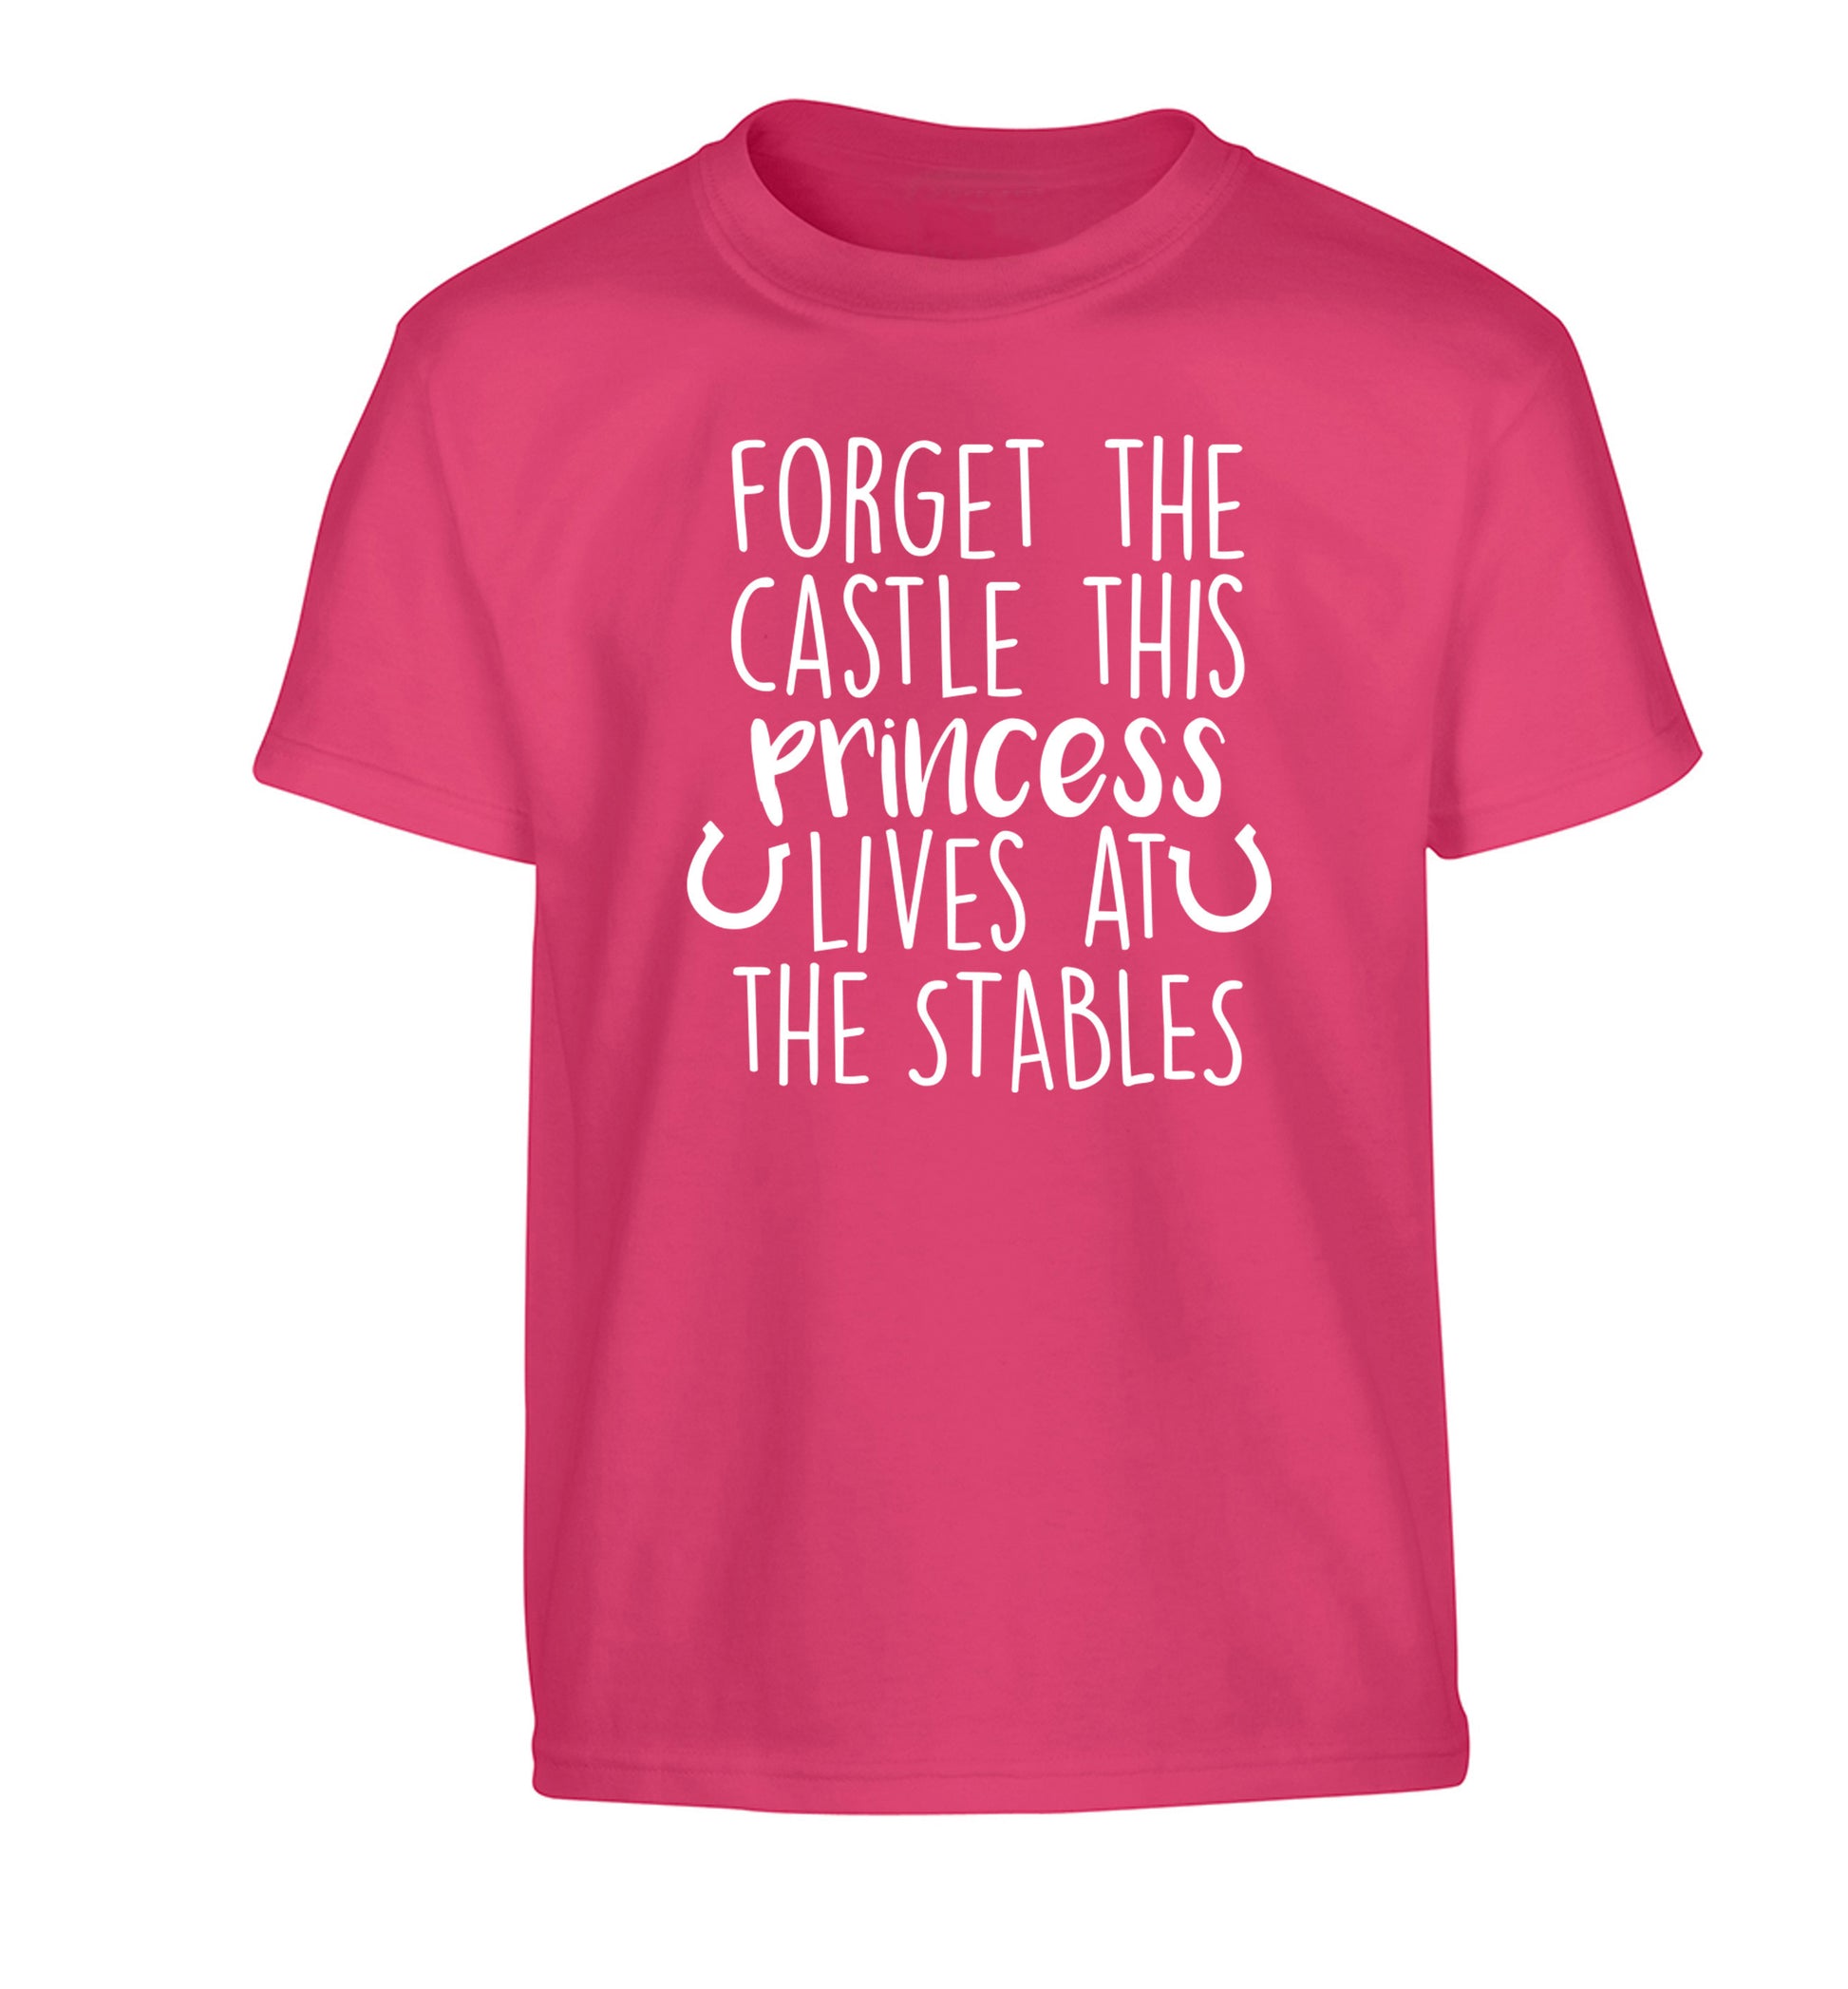 Forget the castle this princess lives at the stables Children's pink Tshirt 12-14 Years